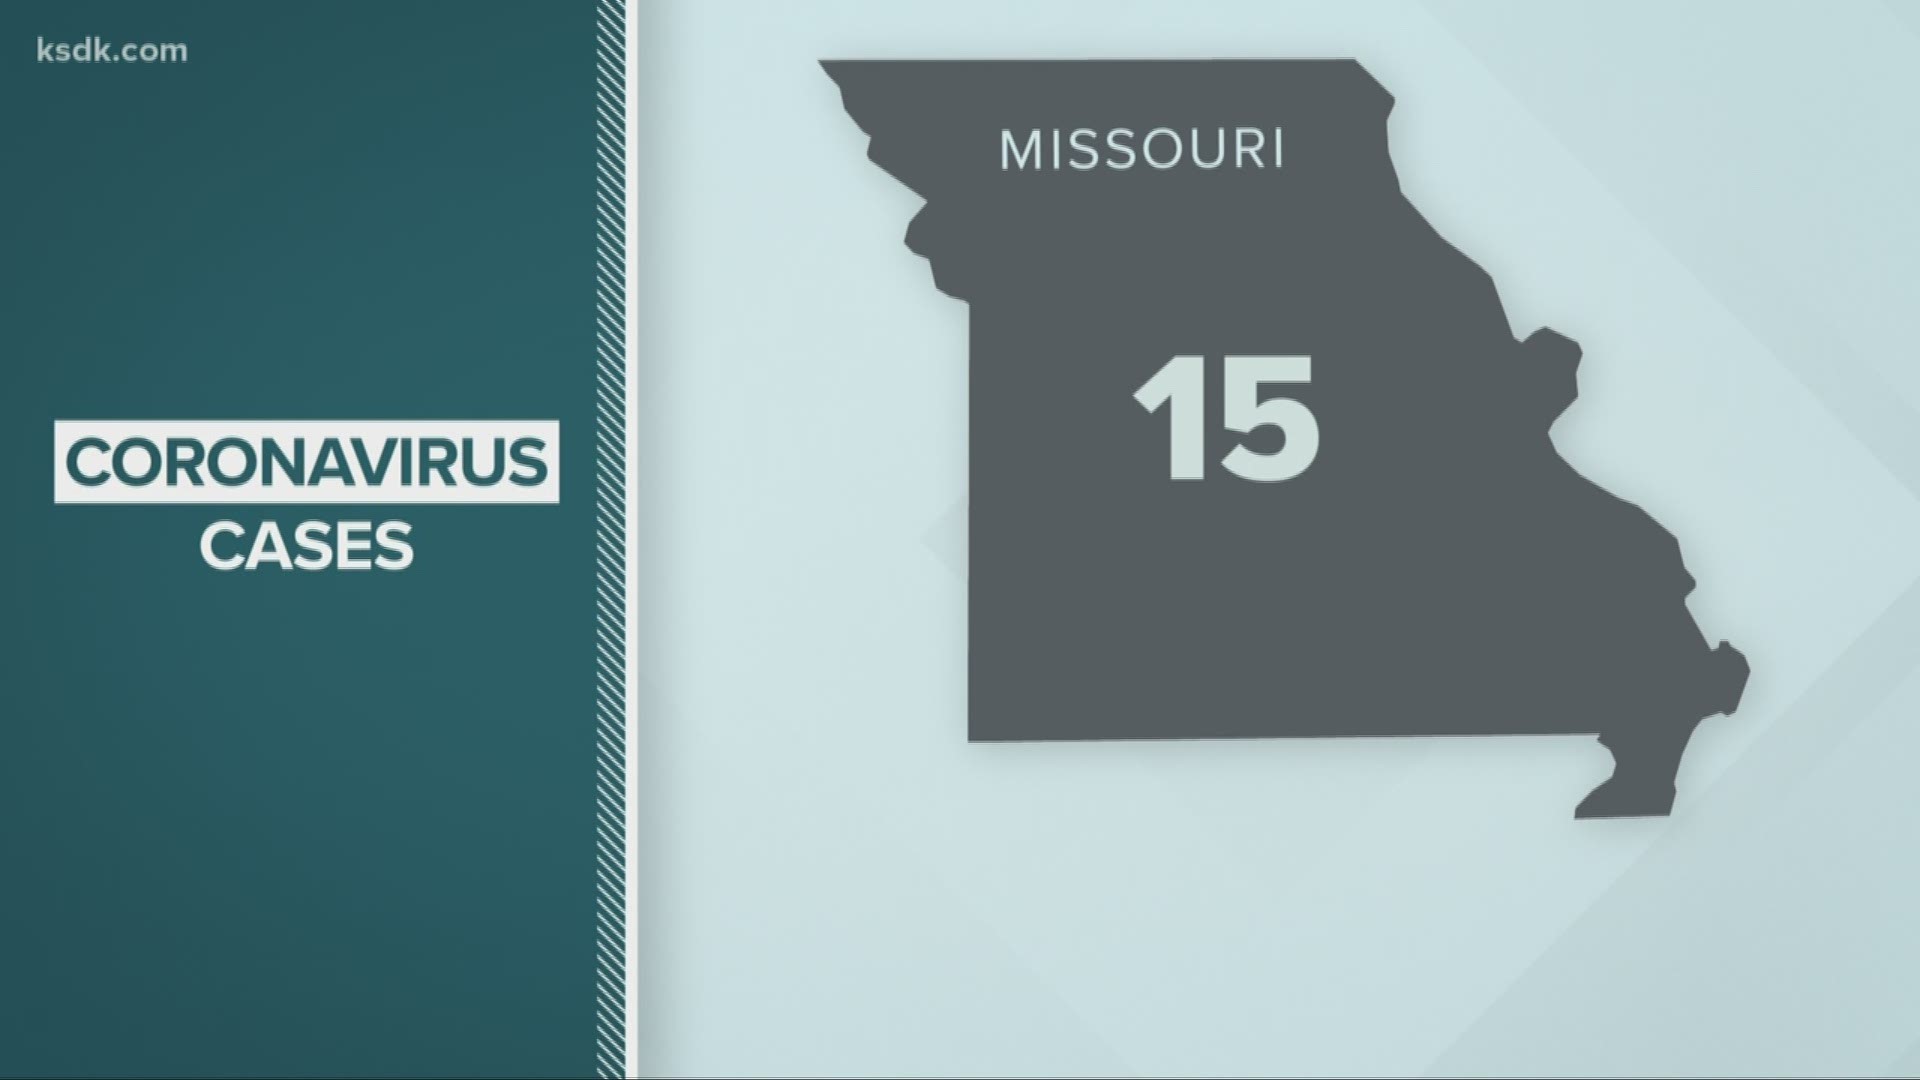 Four of the cases are in St. Louis County, and one of them is in St. Louis City